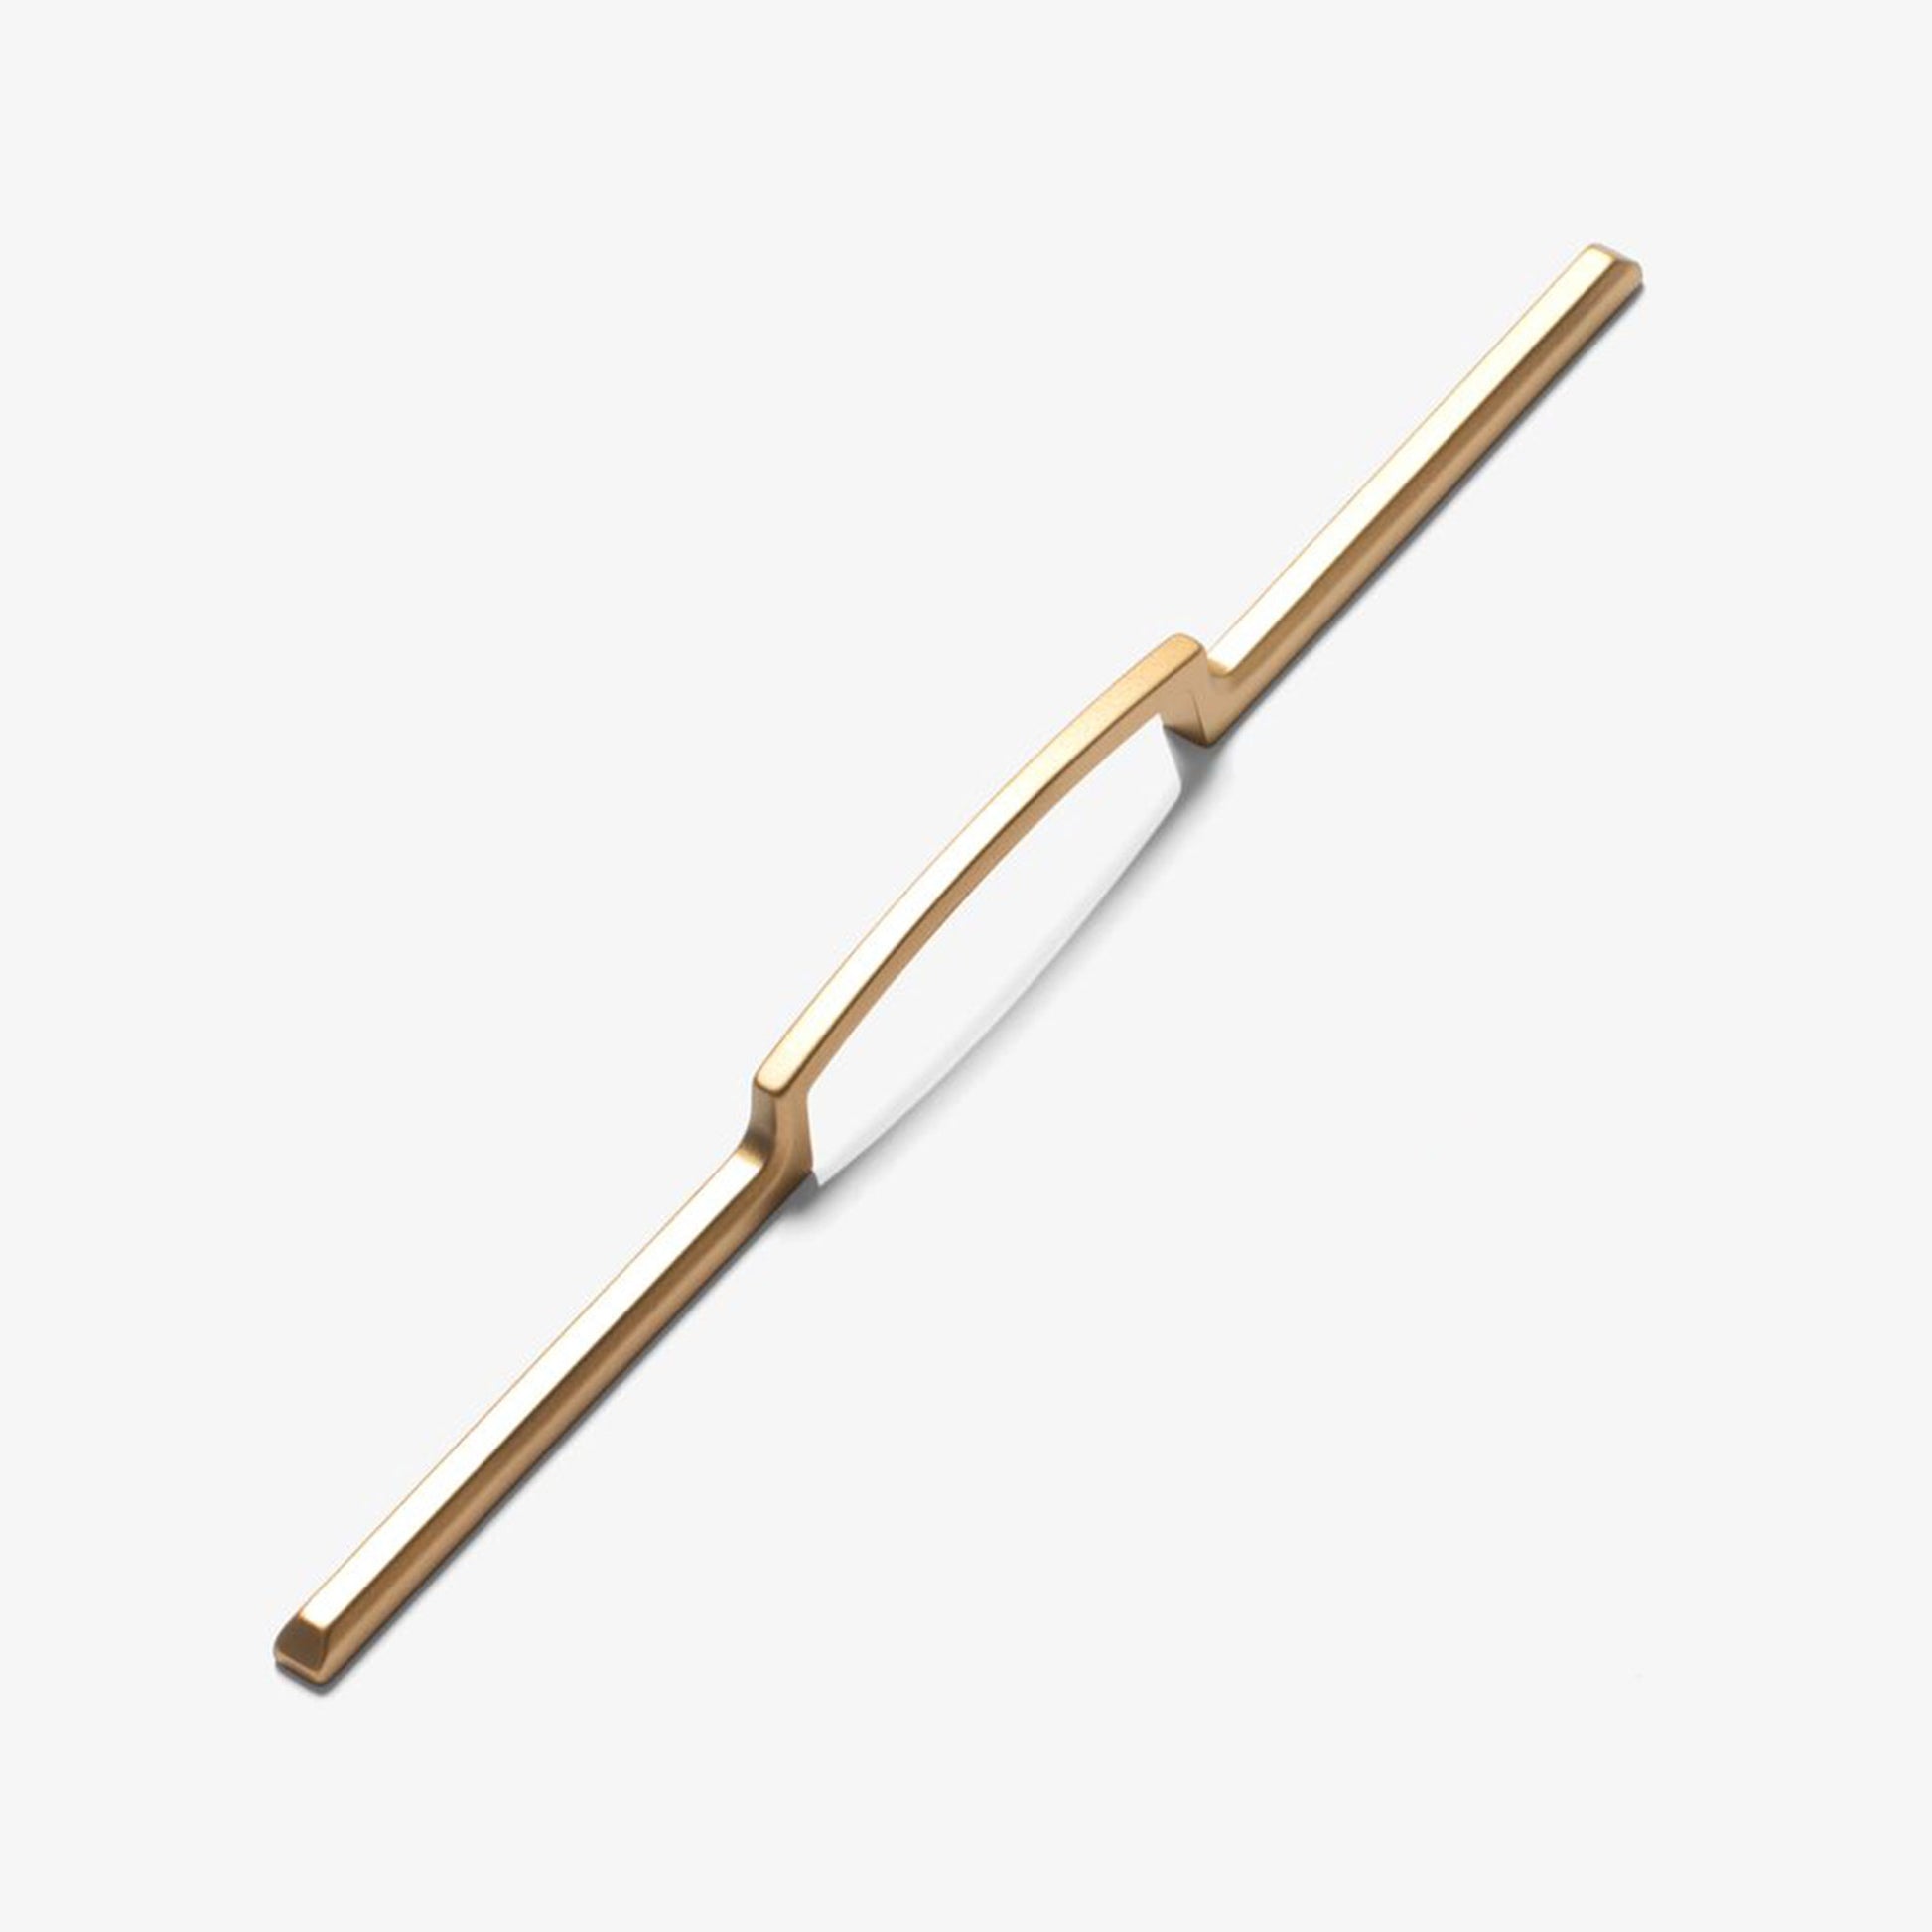 Satin Brass Long Arm Middle Grip Modern Cabinet Pull by Studio Marchant